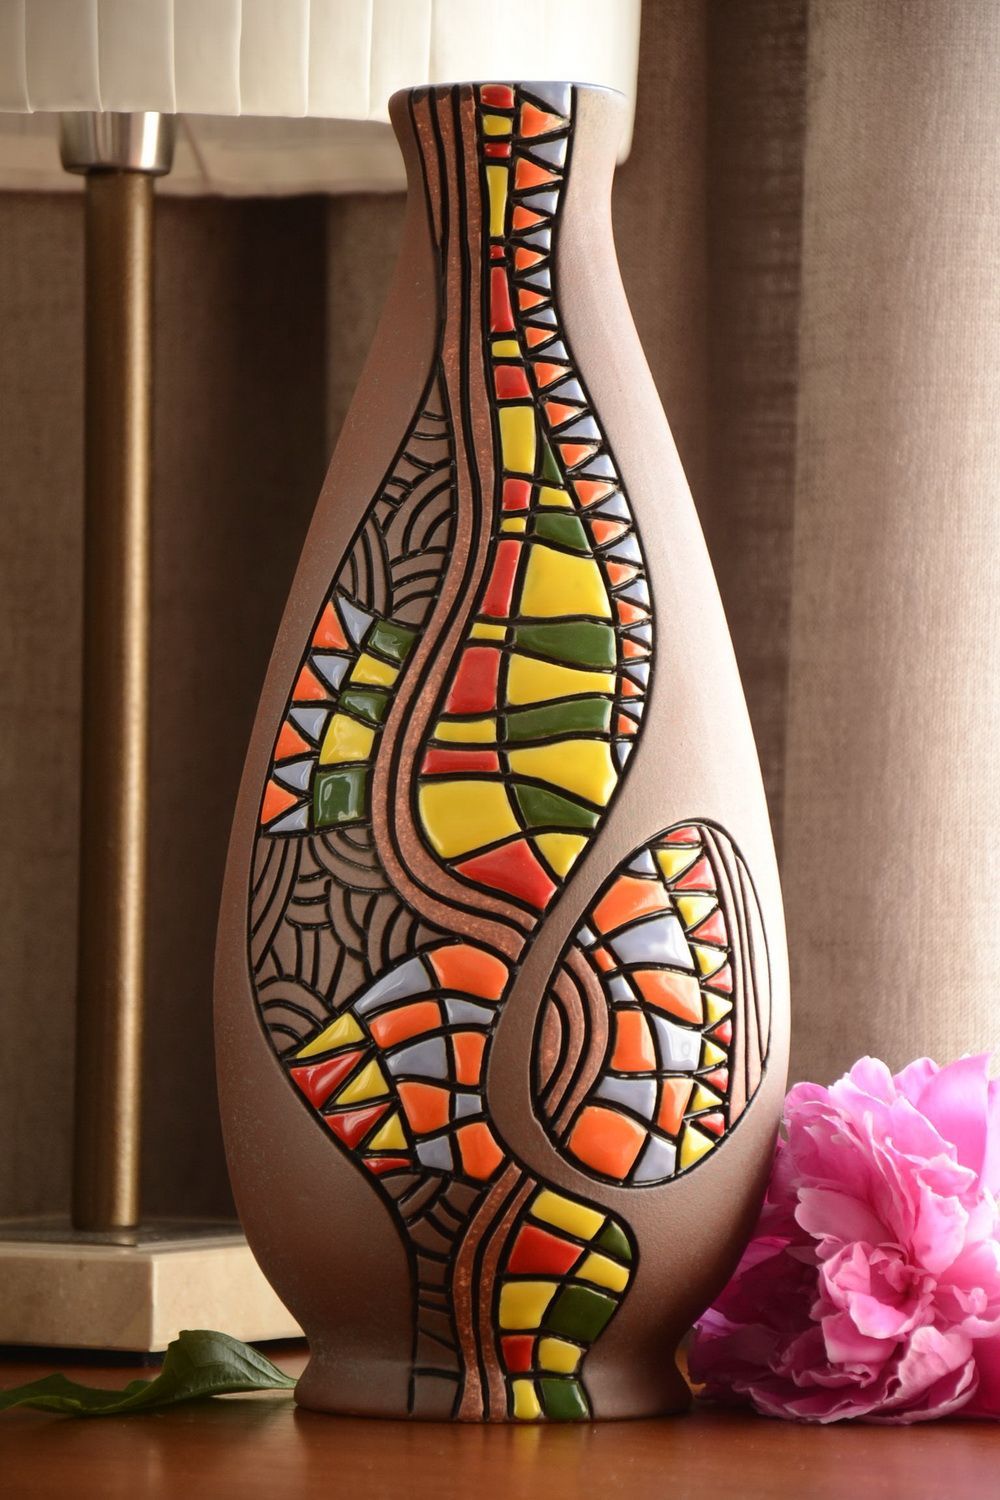 15 inches 90 oz ceramic handmade vase great gift for mother's day 3,6 lb photo 1